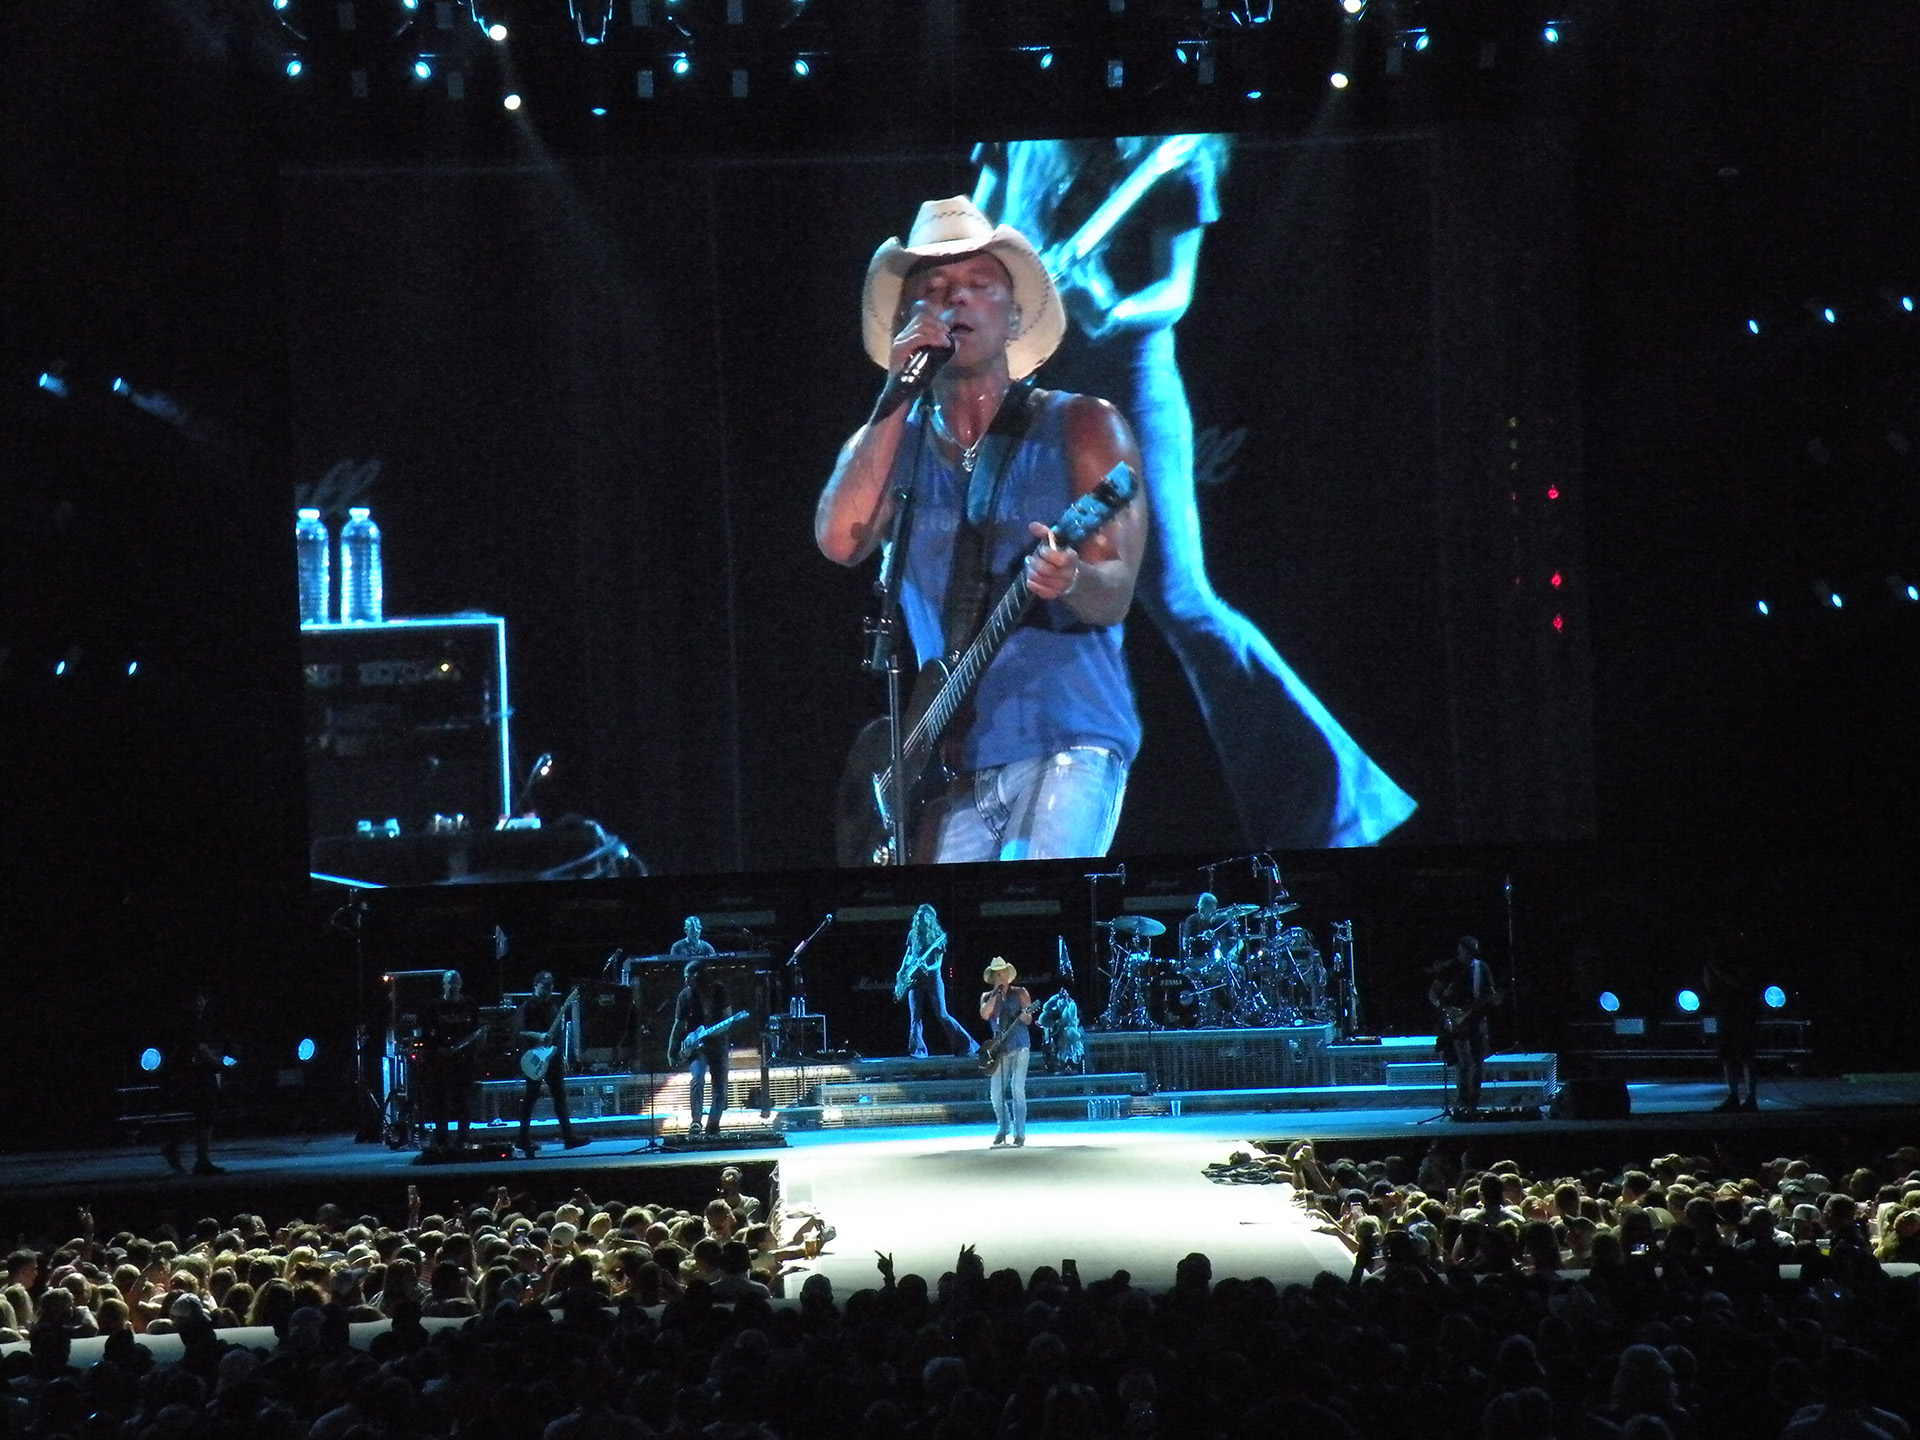 KENNY CHESNEY “TRIP AROUND THE SUN” TOUR PACKS CHASE FIELD